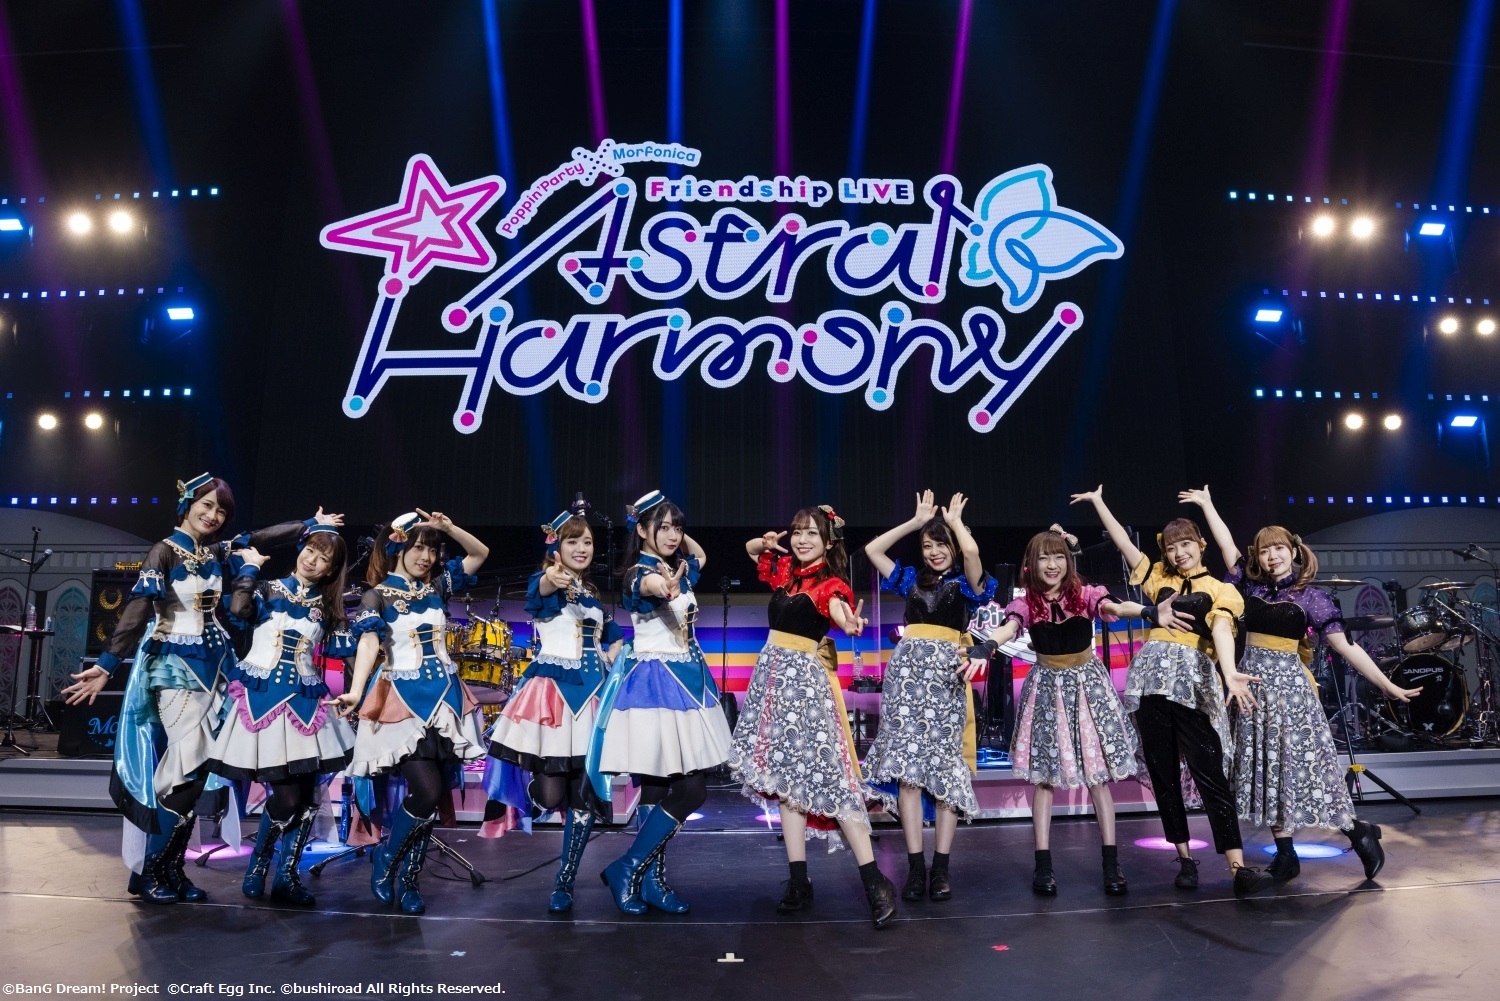 Poppin’Party×Morfonica Friendship LIVE『Astral Harmony』集合写真